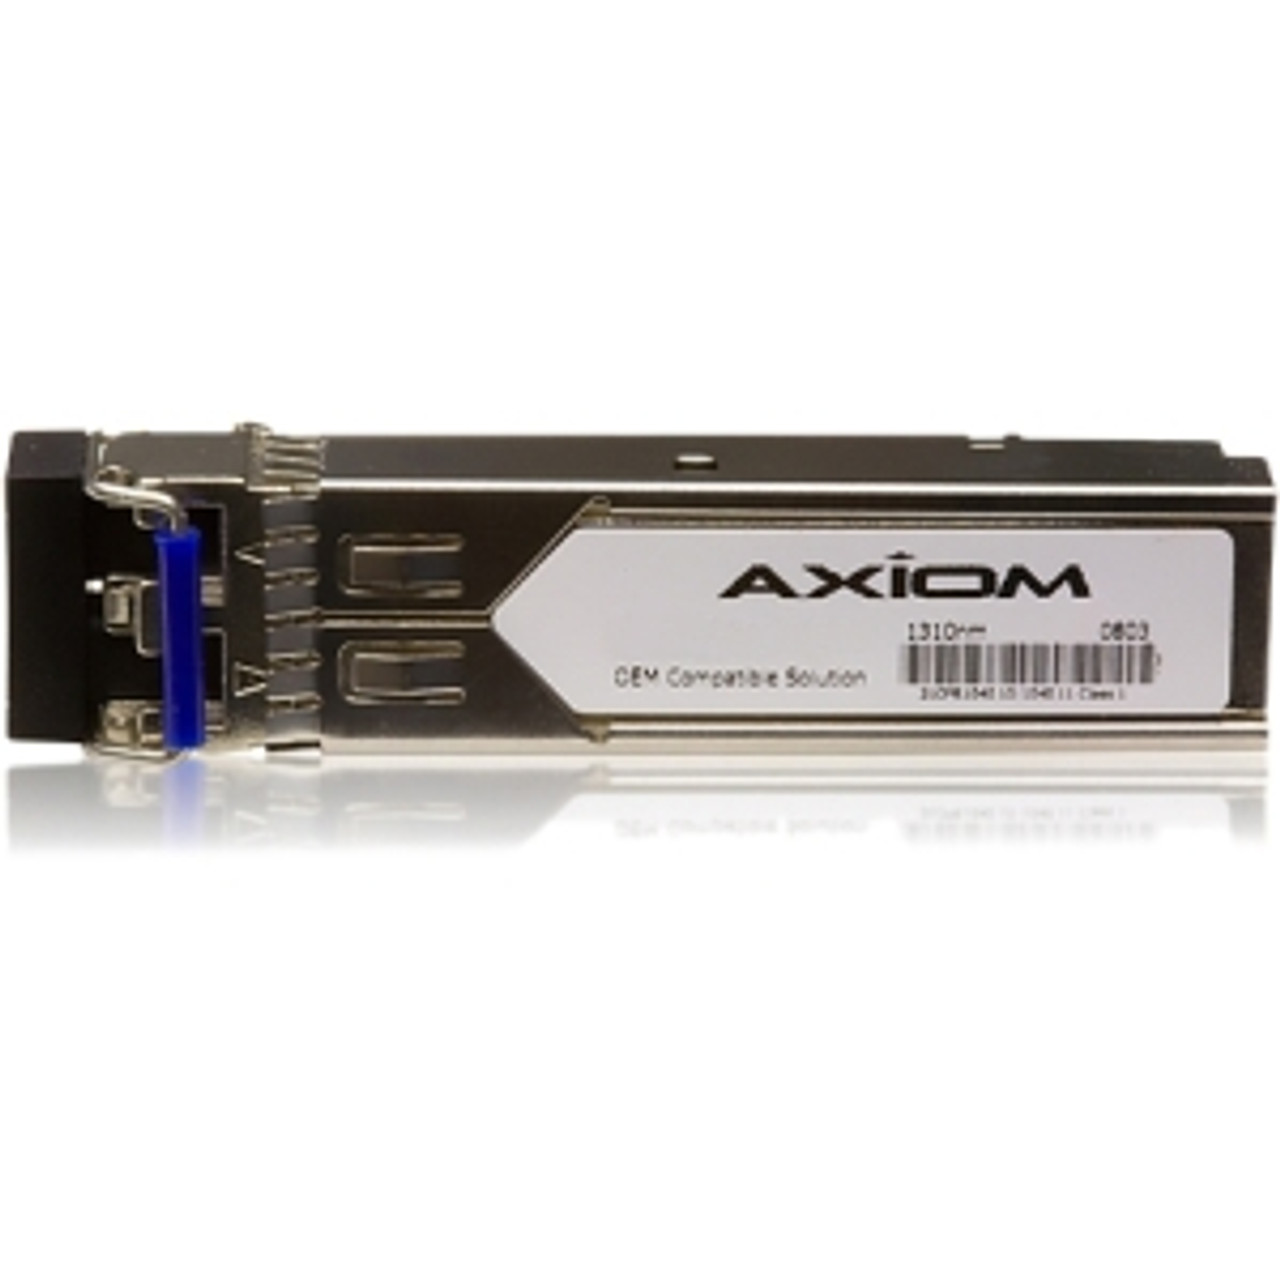 J9143B-AX Axiom 1Gbps 1000Base-BX-U Single-mode Fiber 10km 1310nmTX/1490nmRX LC Connector SFP Transceiver Module for HP Compatible